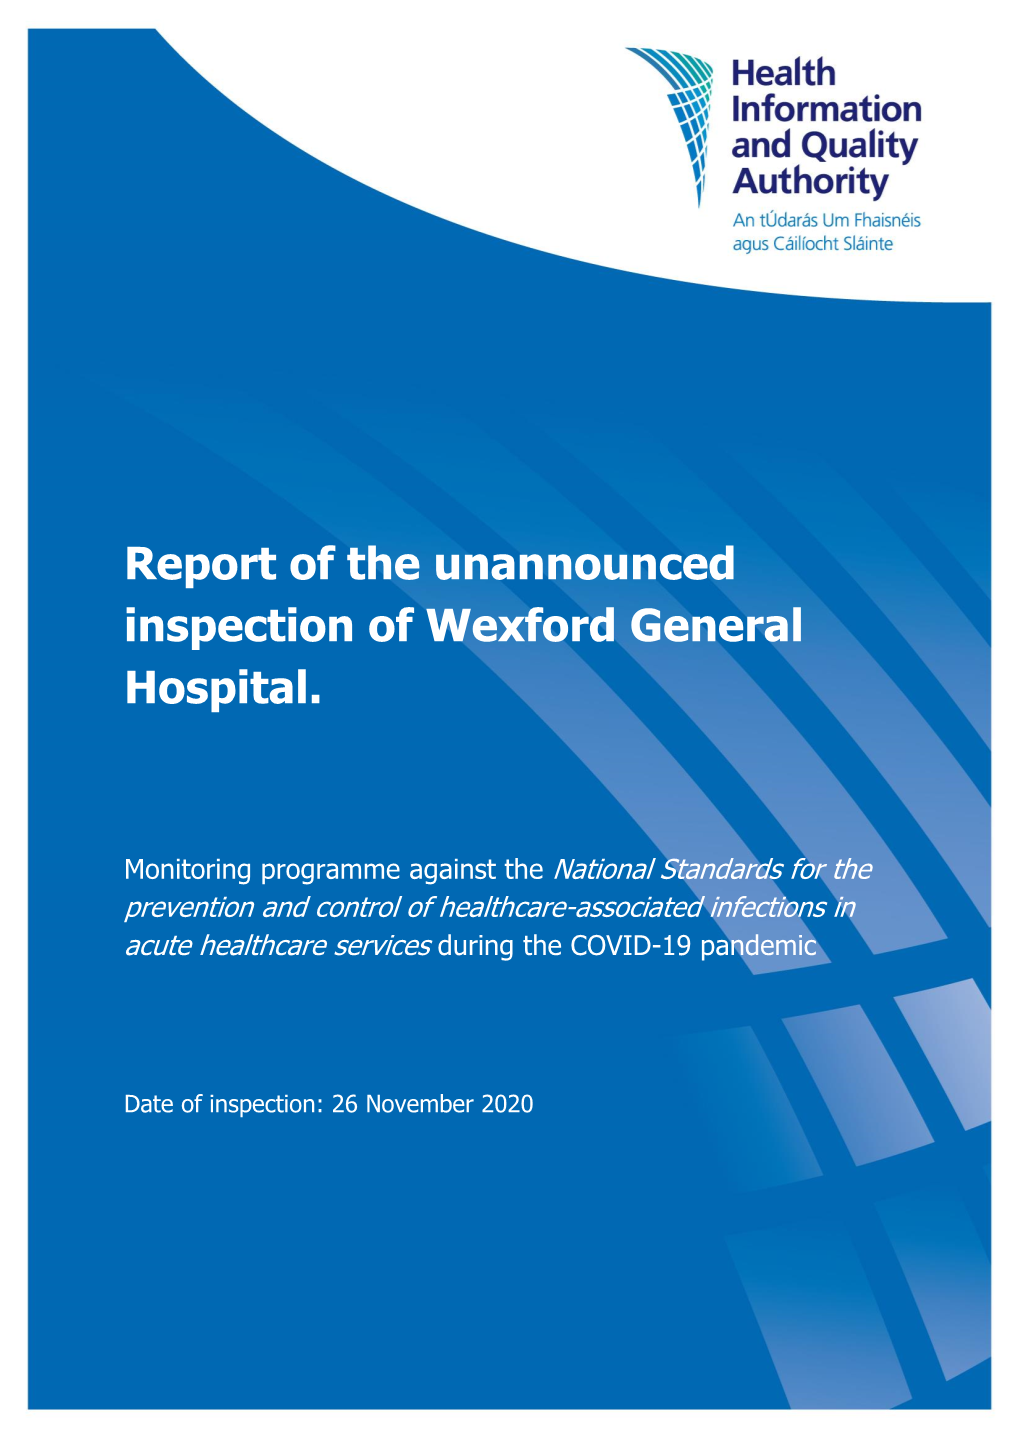 Report of the Unannounced Inspection of Wexford General Hospital